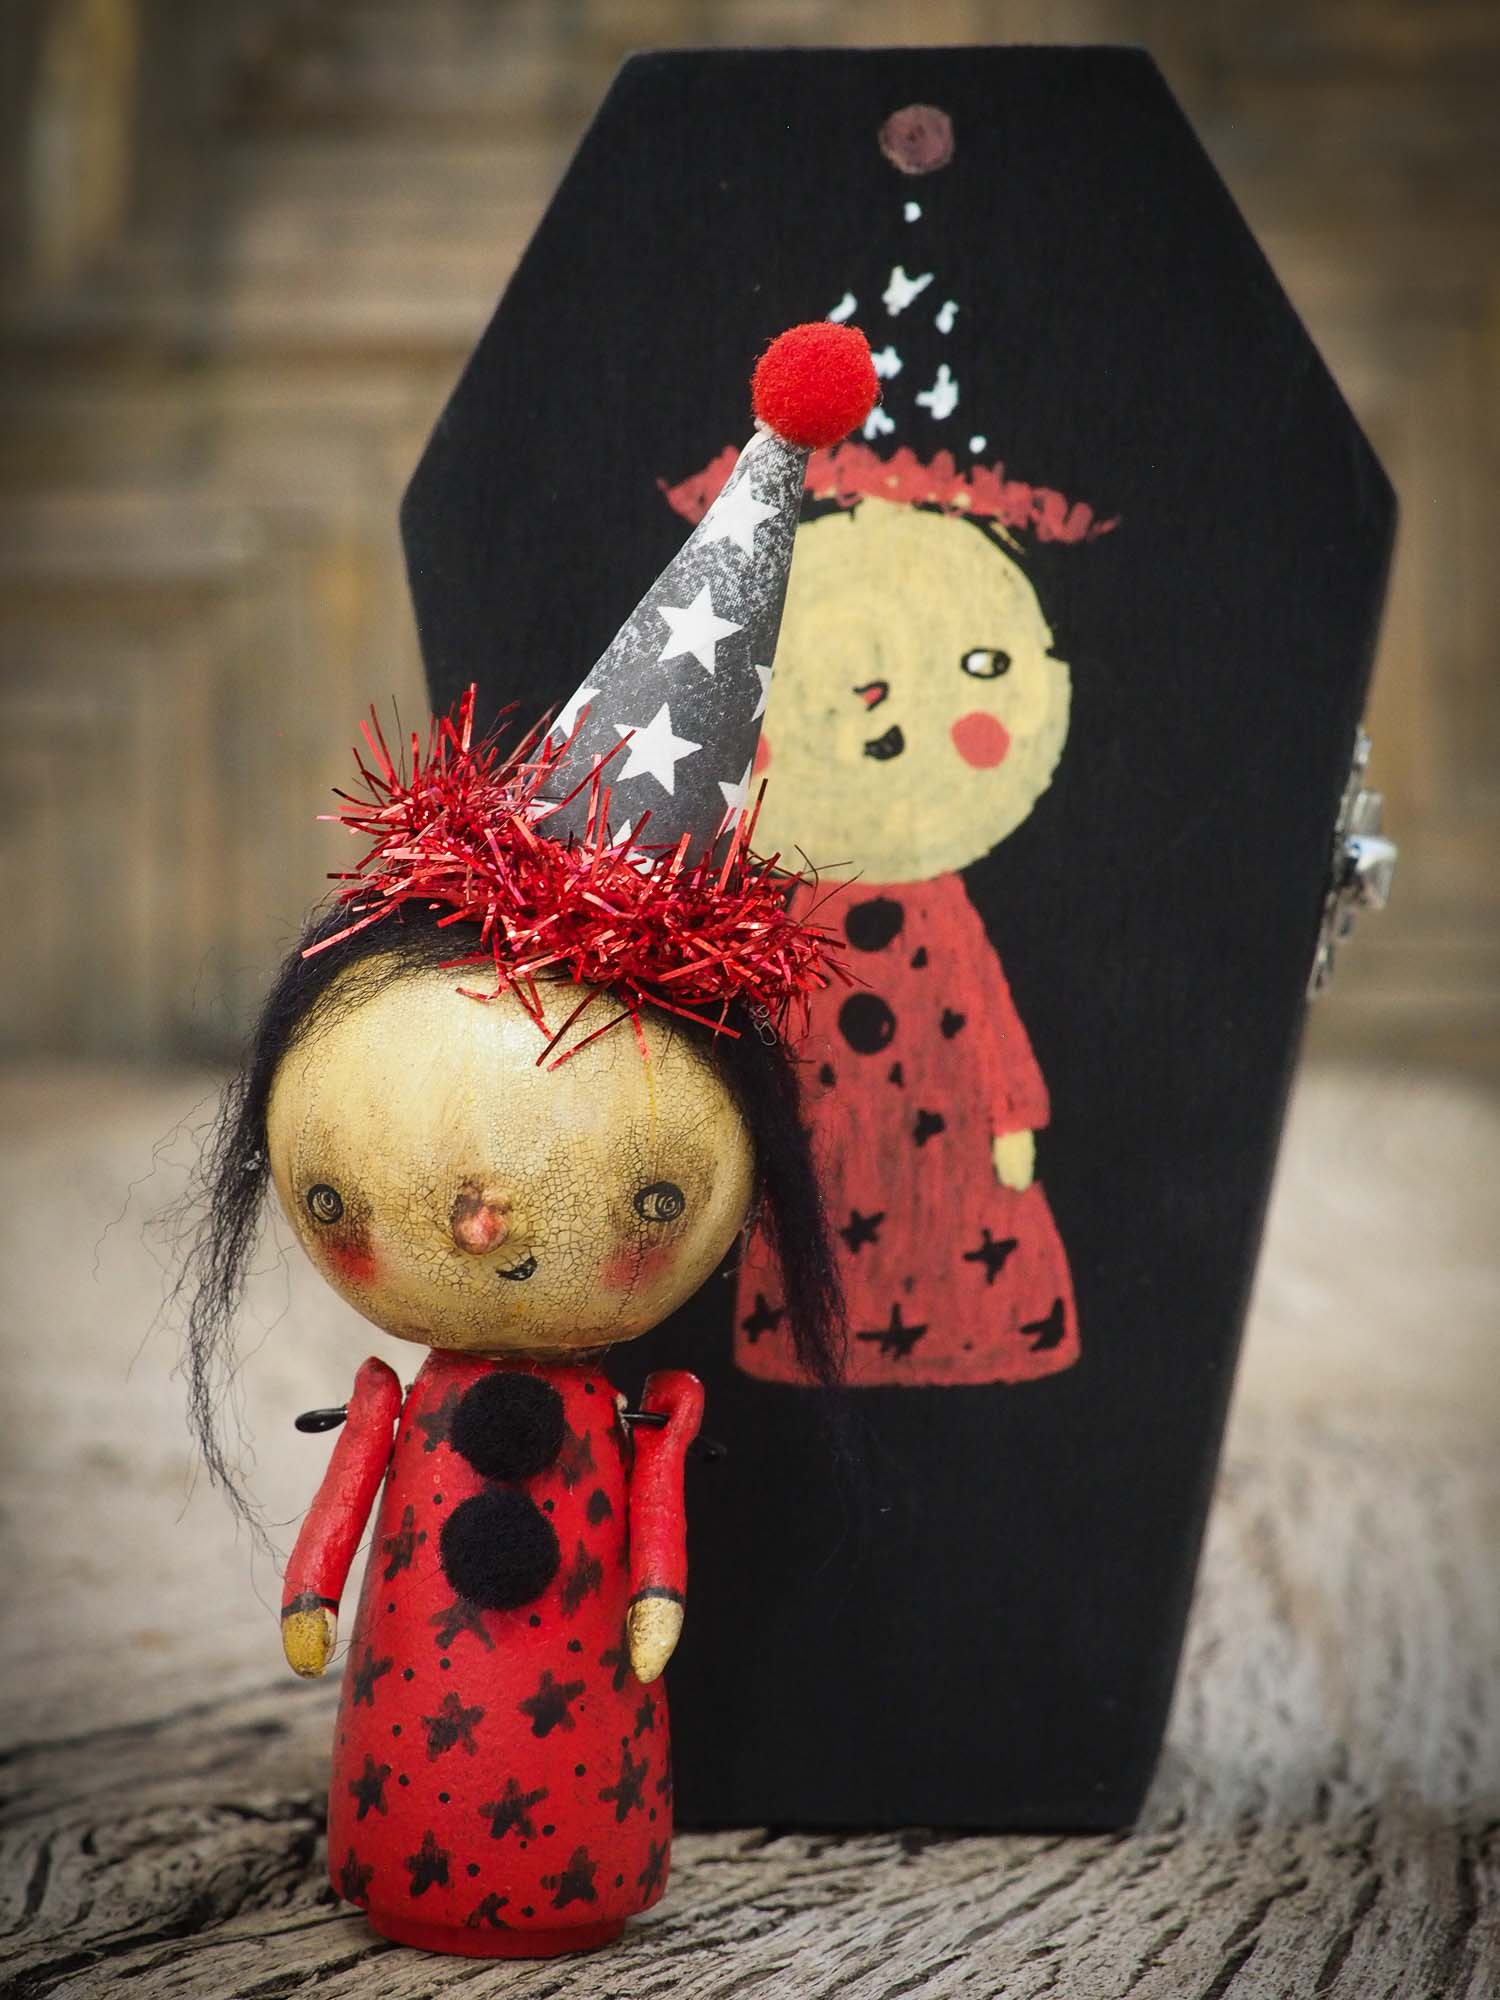 Folk art whimsical halloween witch mini kokeshi wooden style art dolls, designed and hand painted by non other that Danita Art, with painted body and wizard and witch clothes, adorable hand sculpted noses and a beautiful face with a whimsical smile. They come with a coffin shaped display and storage case for home decor